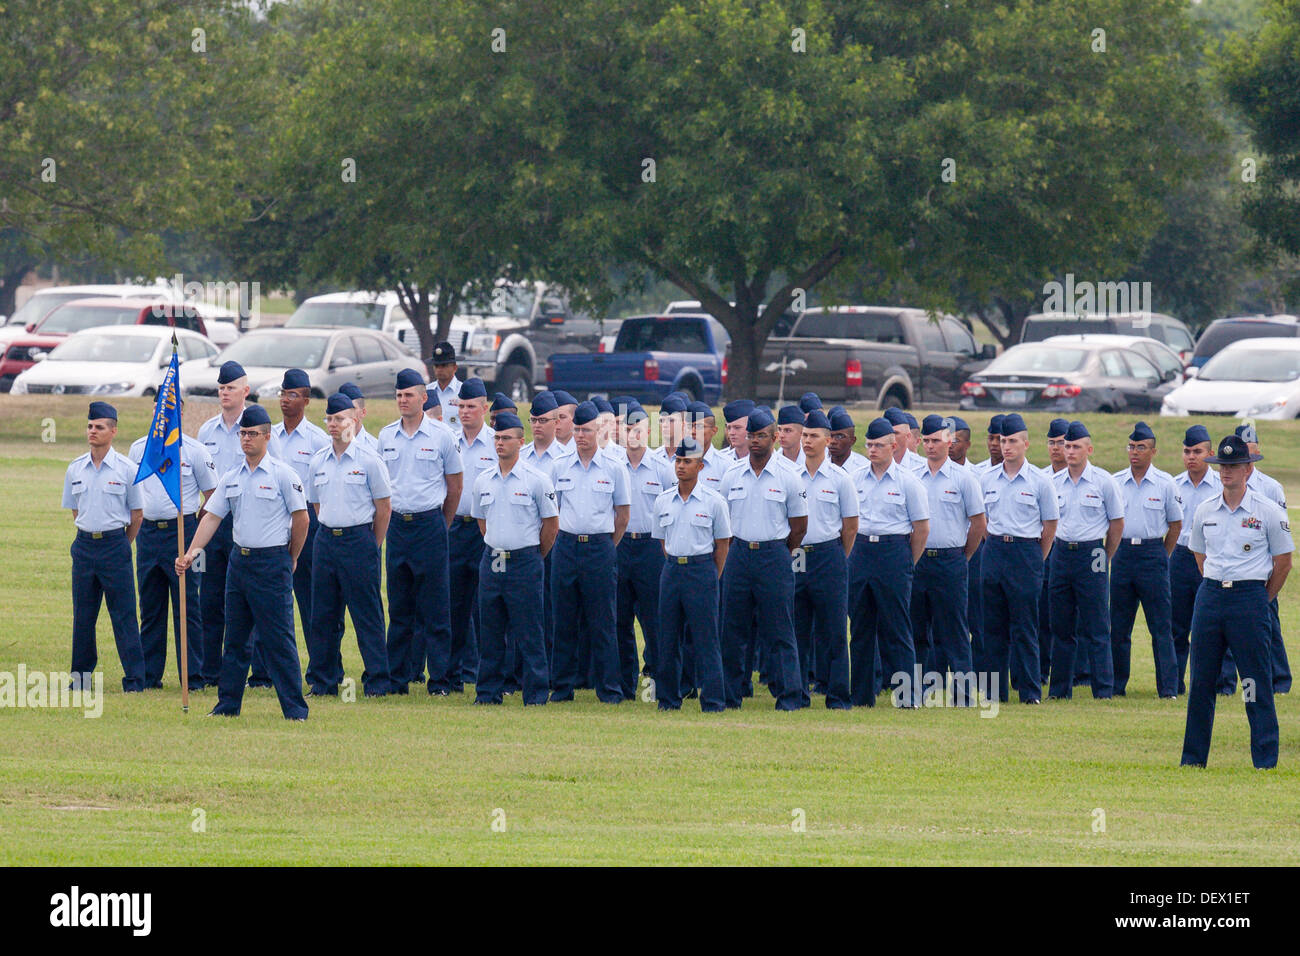 Airmen at parade rest during United States Air Force basic training